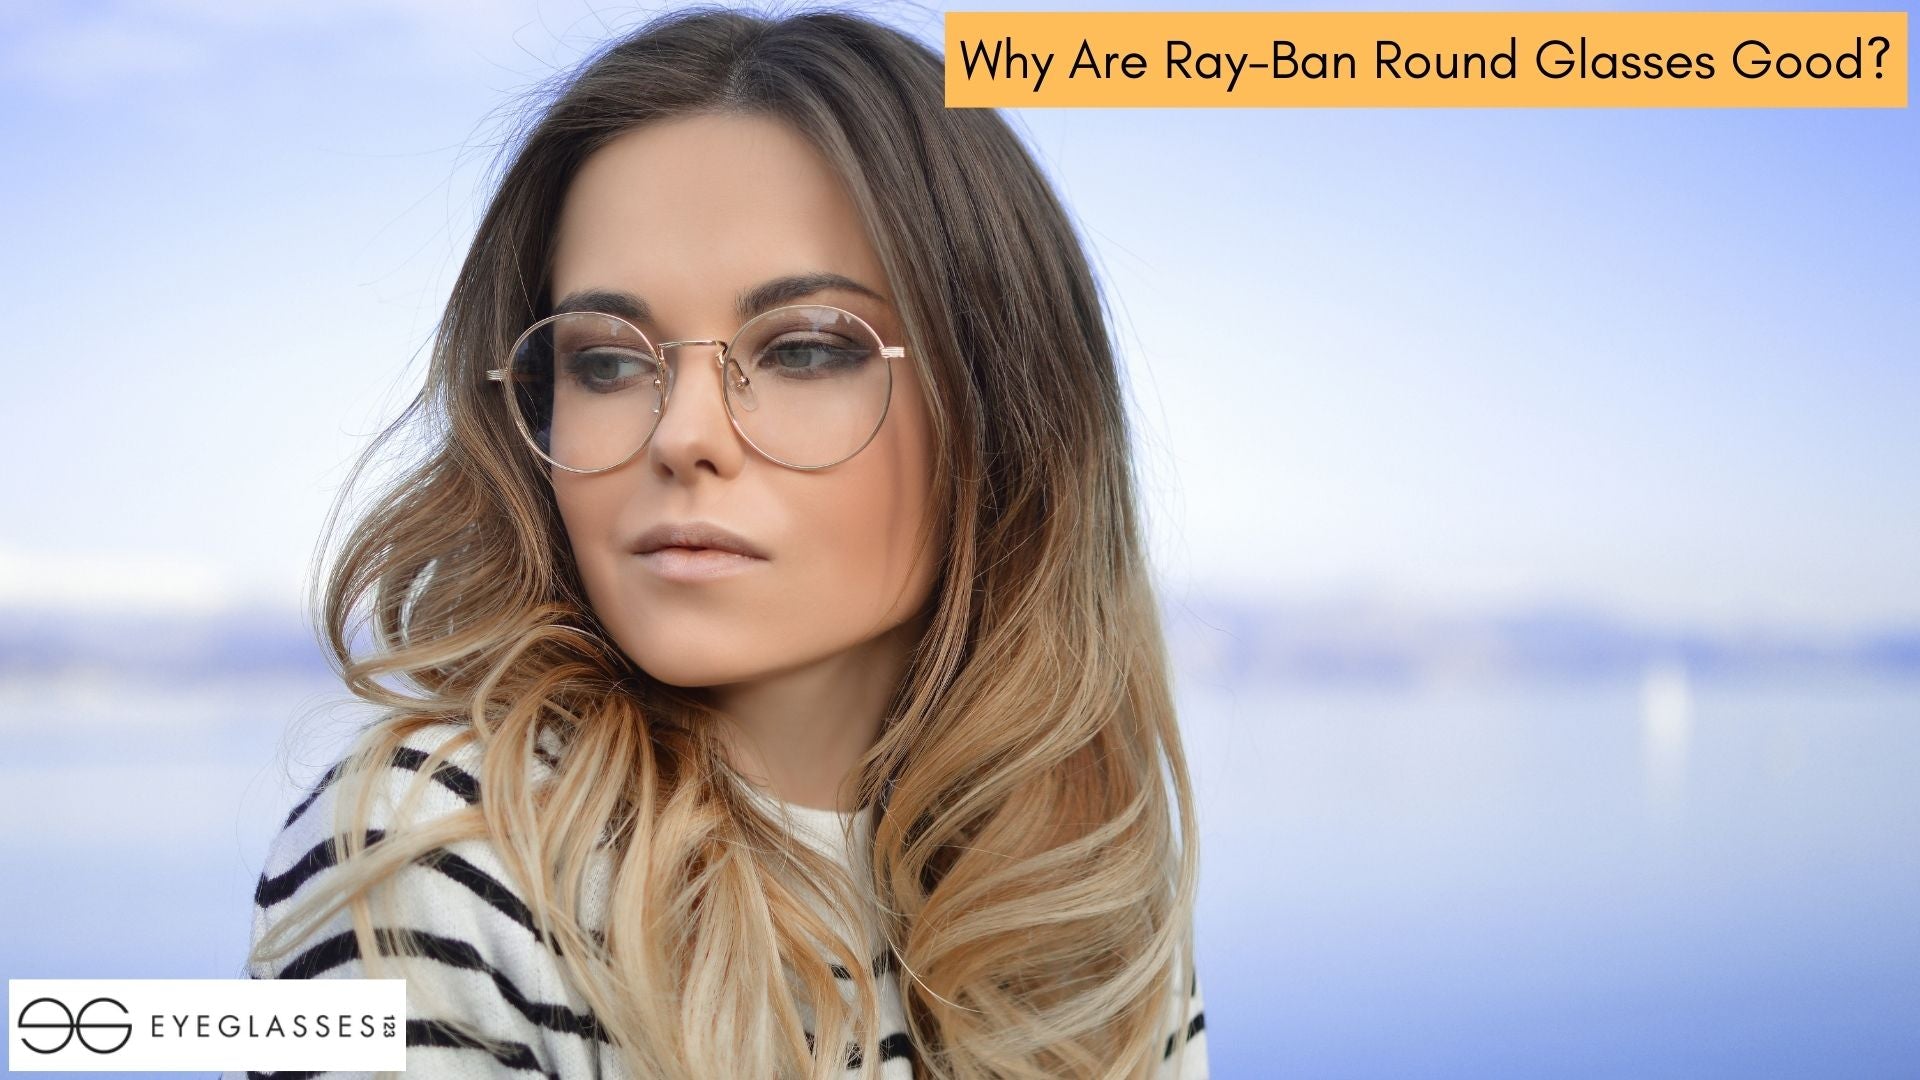 Why Are Ray-Ban Round Glasses Good?